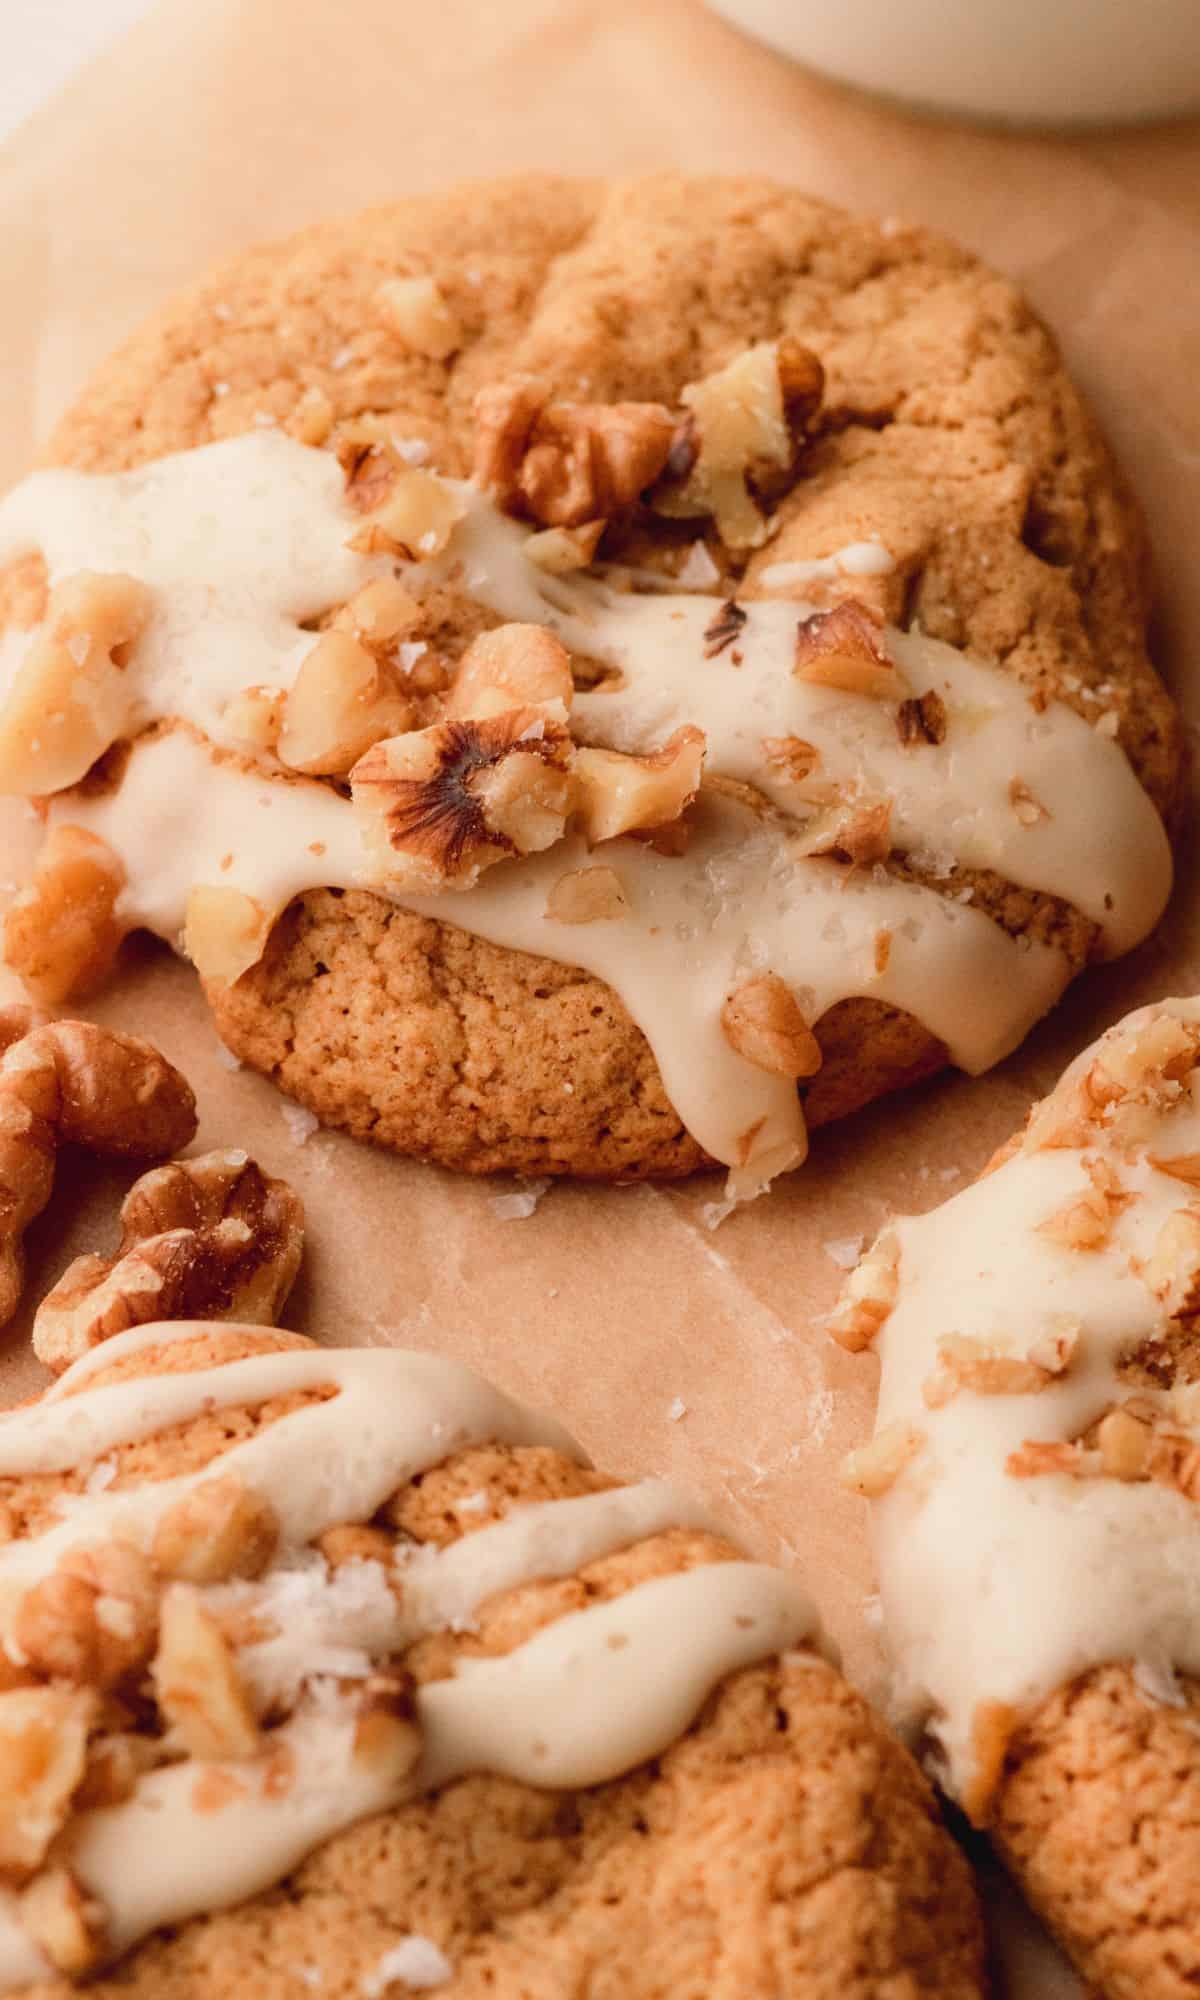 Walnut spice cookies with a maple glaze drizzle and wanuts.